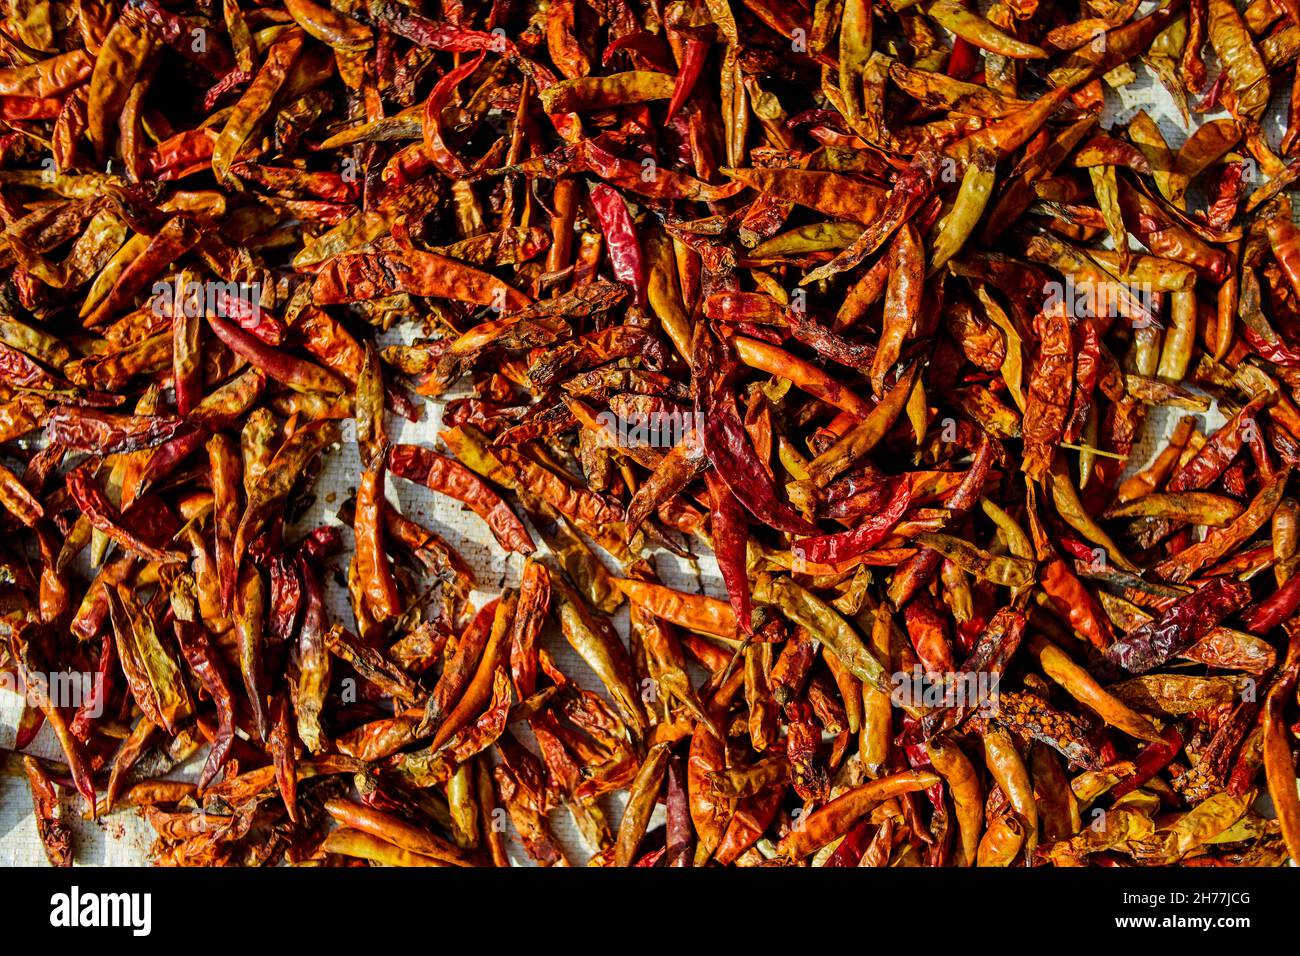 Dried the red ripe chili peppers on the gardening Stock Photo